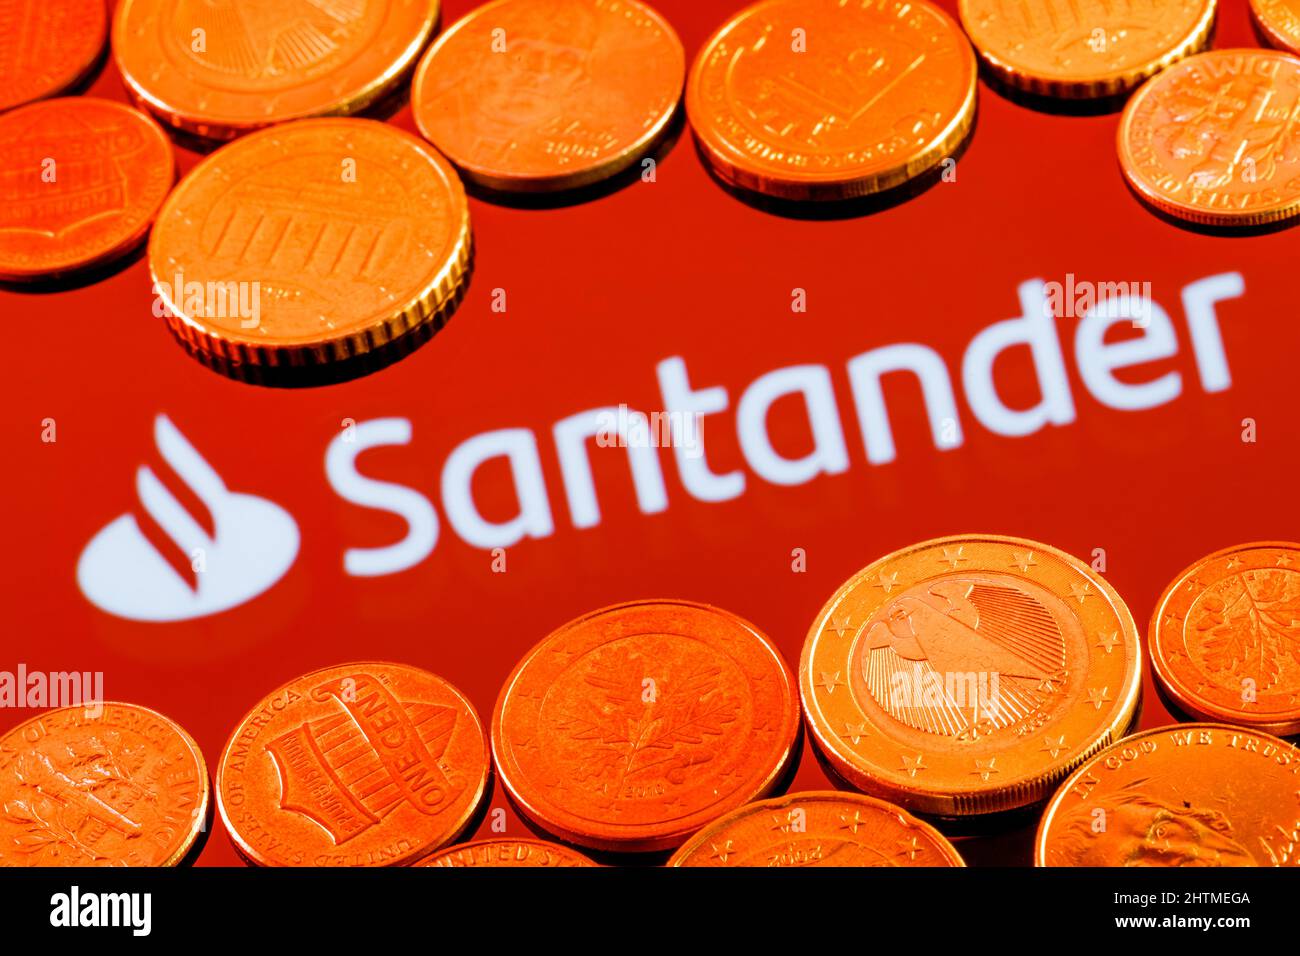 Variety of metal coins on background of Santander bank logo Stock Photo